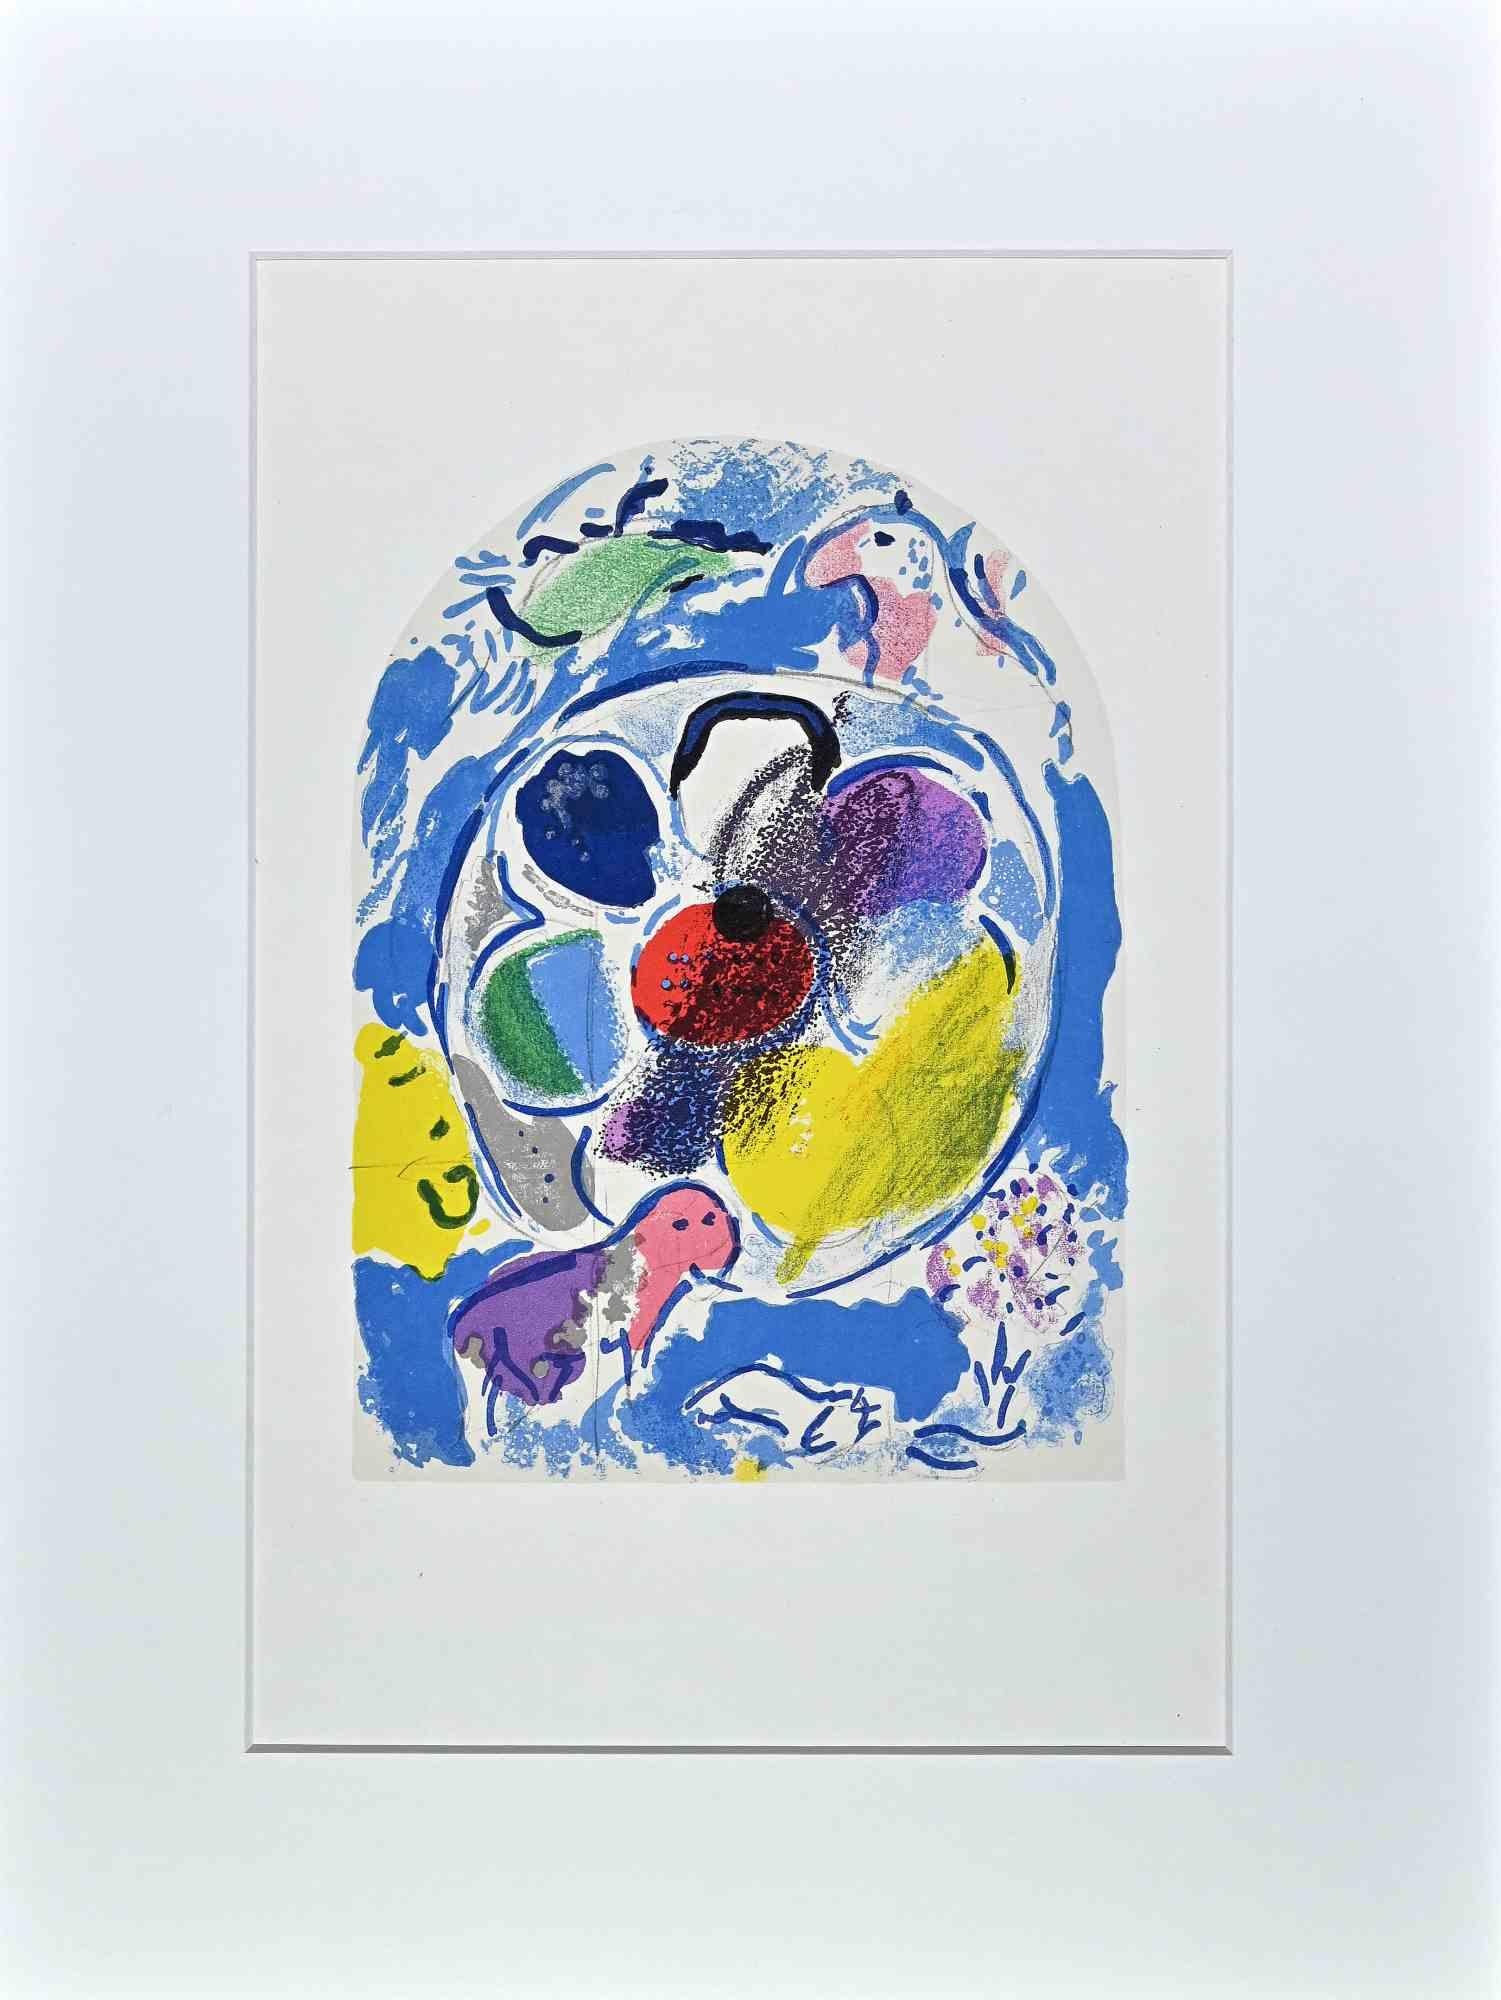 Genesys XLIX , 27 from Vitraux pour Jérusalem is an original lithograph print on paper realized by Marc Chagall,  Monte Carlo Sauret, 1962.

Includes Passepartout (40 x 30 cm).

With another colored lithograph on the rear.